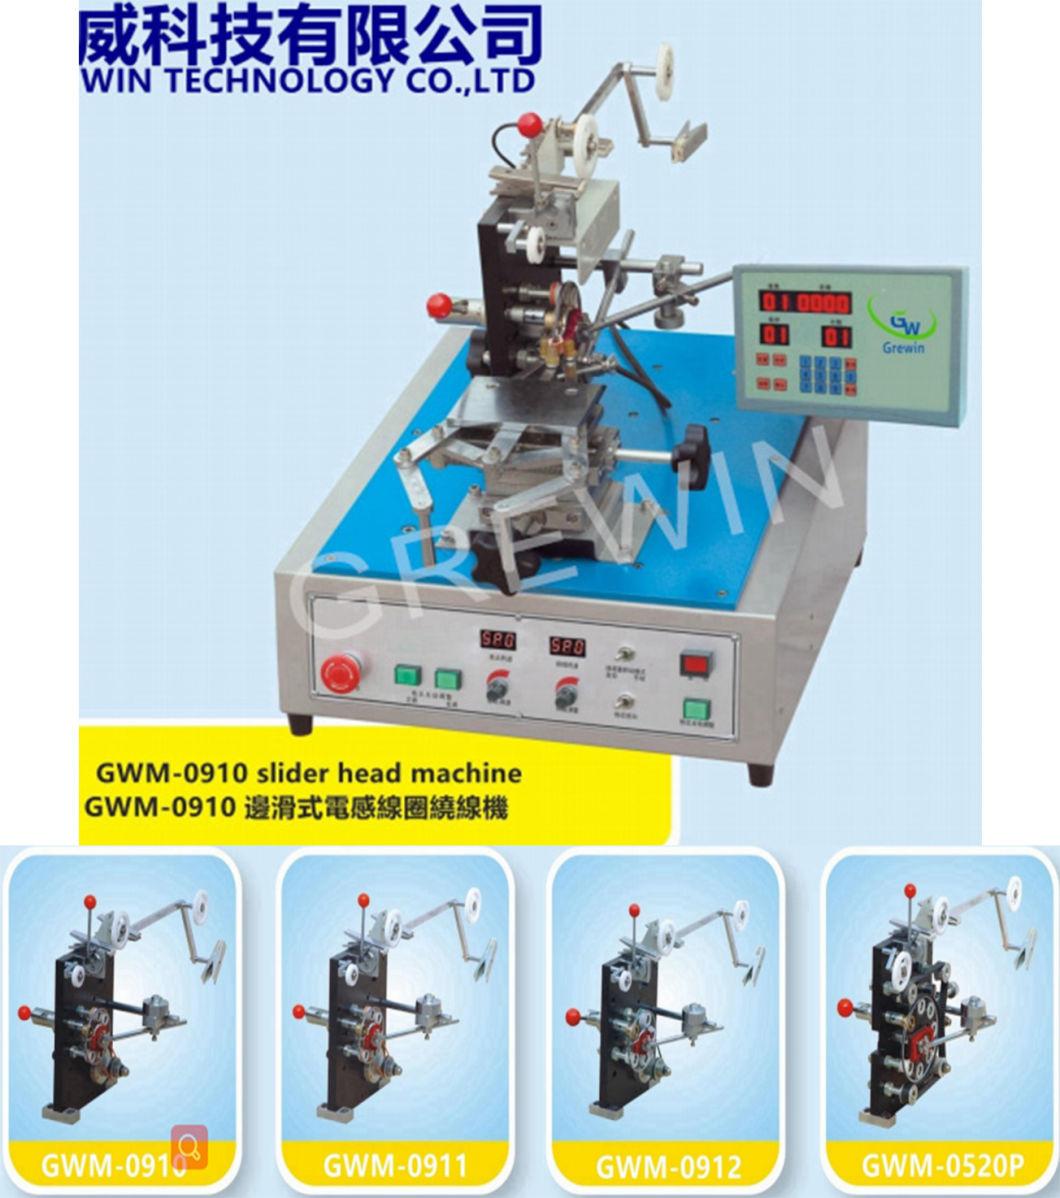 Automatic Converter Magneto Toroid Inductor Coil Winding Machine